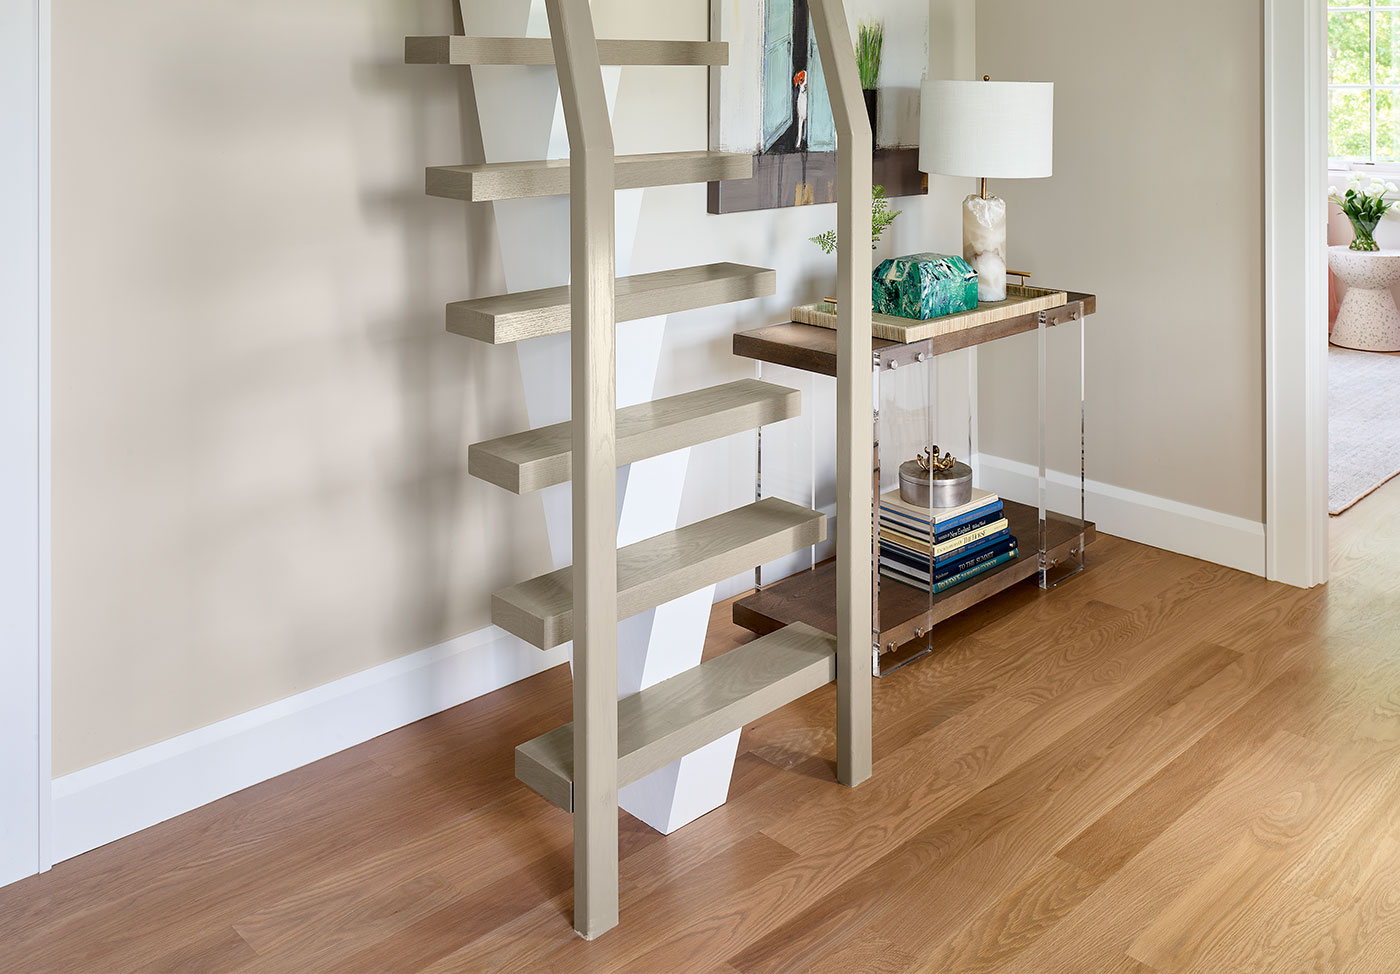 Staircase ladder to the loft.